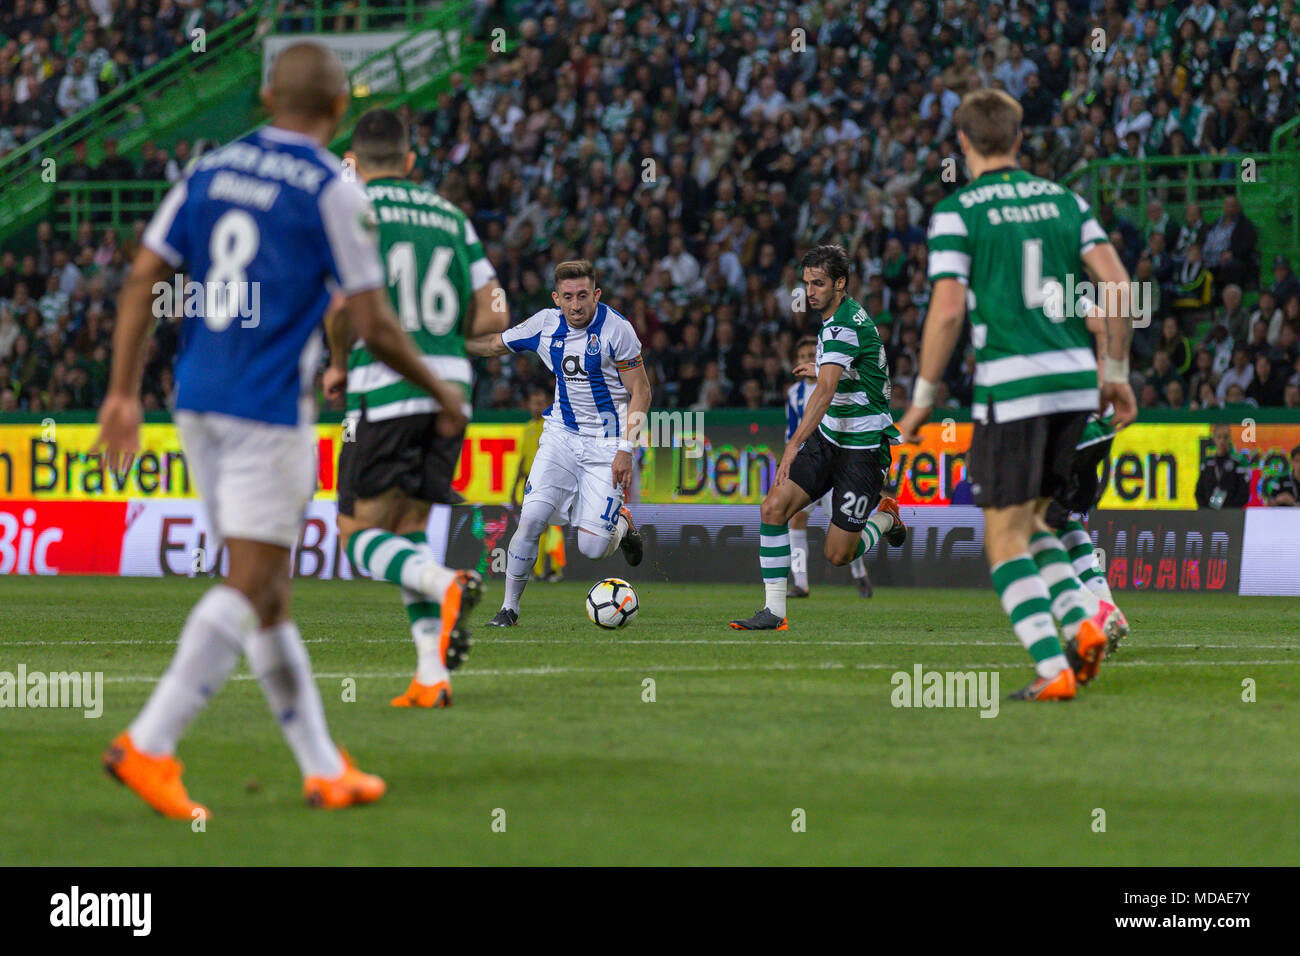 April 18, 2018. Lisbon, Portugal. PortoÕs midfielder from Mexico Hector Herrera (16) in action during the game Sporting CP vs FC Porto © Alexandre de Sousa/Alamy Live News Stock Photo